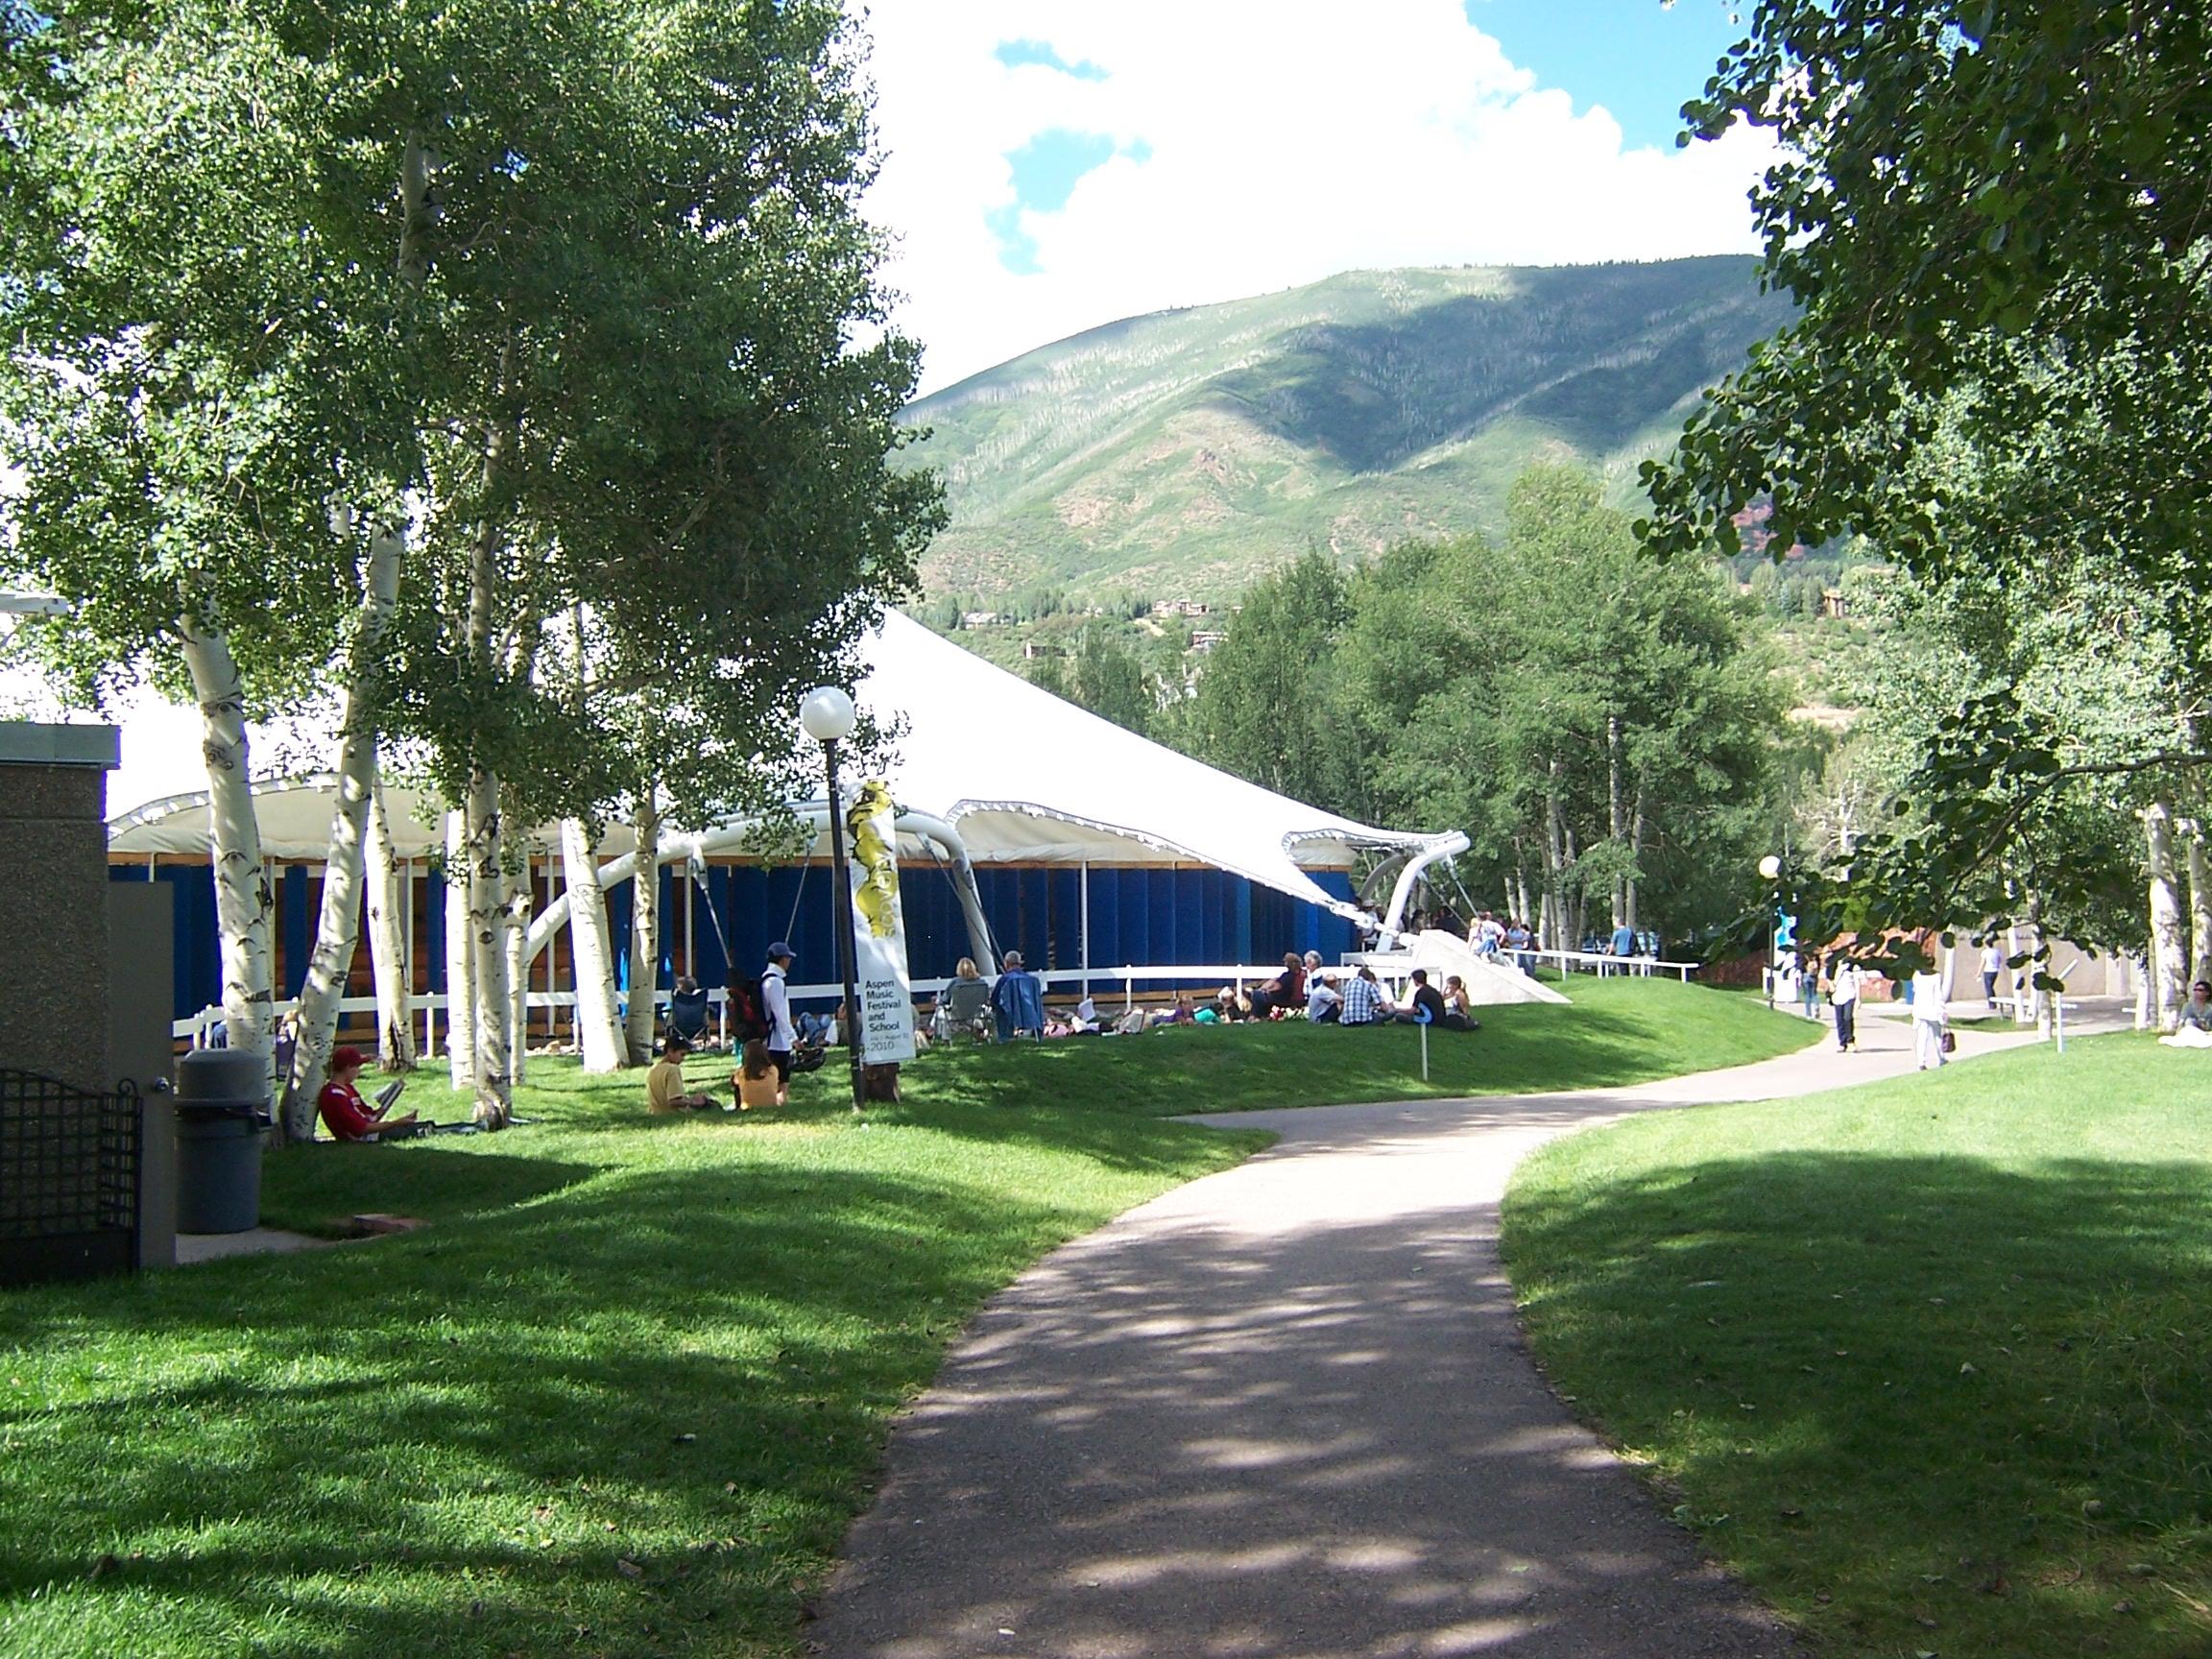 This Weekend at the Aspen Music Festival